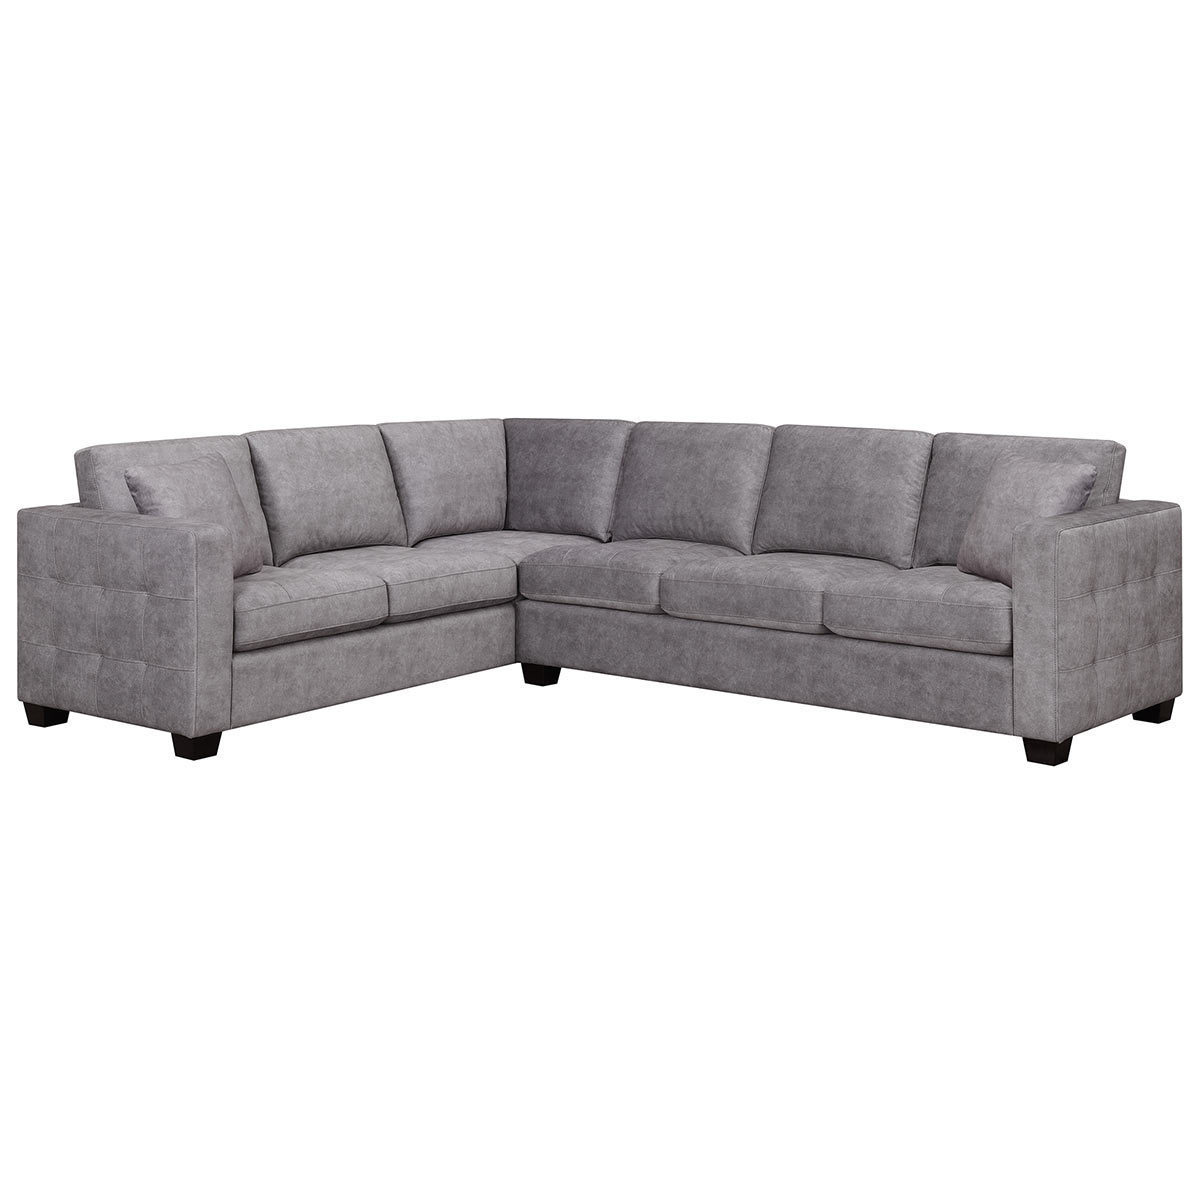 Cut out image of corner sofa on white background angled shot without ottoman